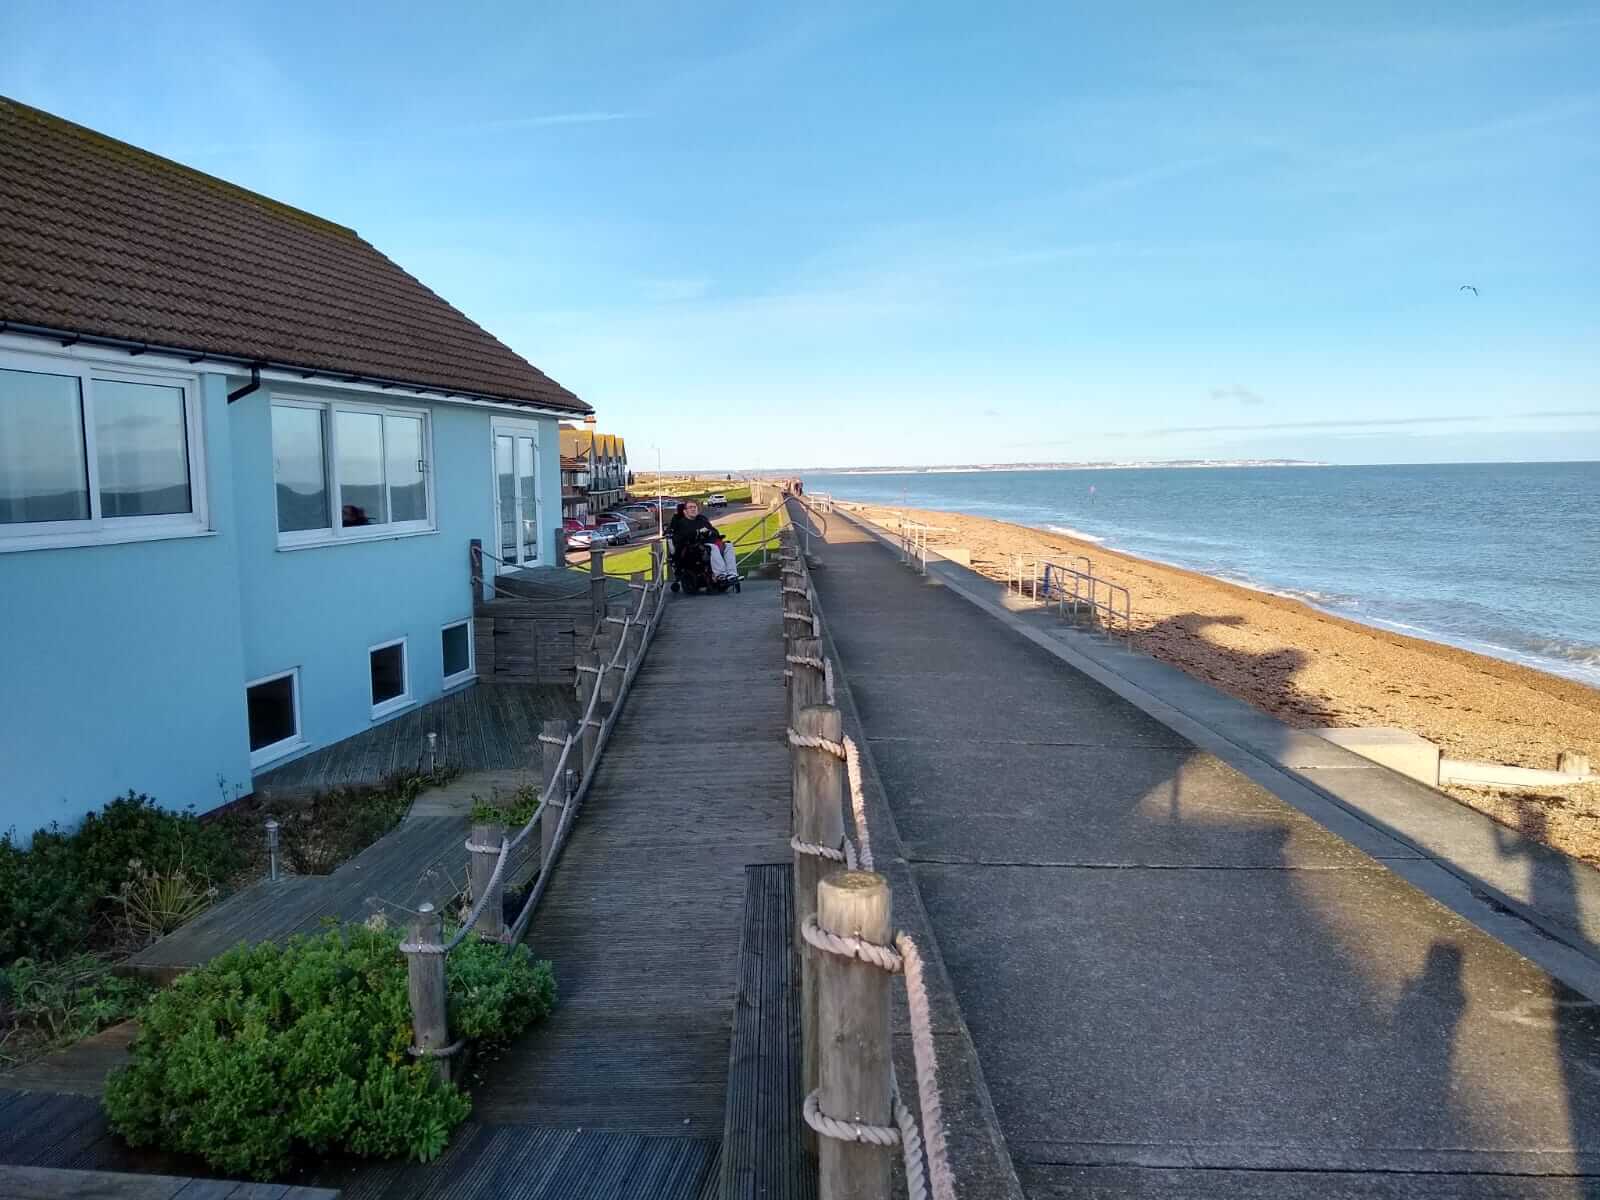 The exterior of the cottage and beach promenade.